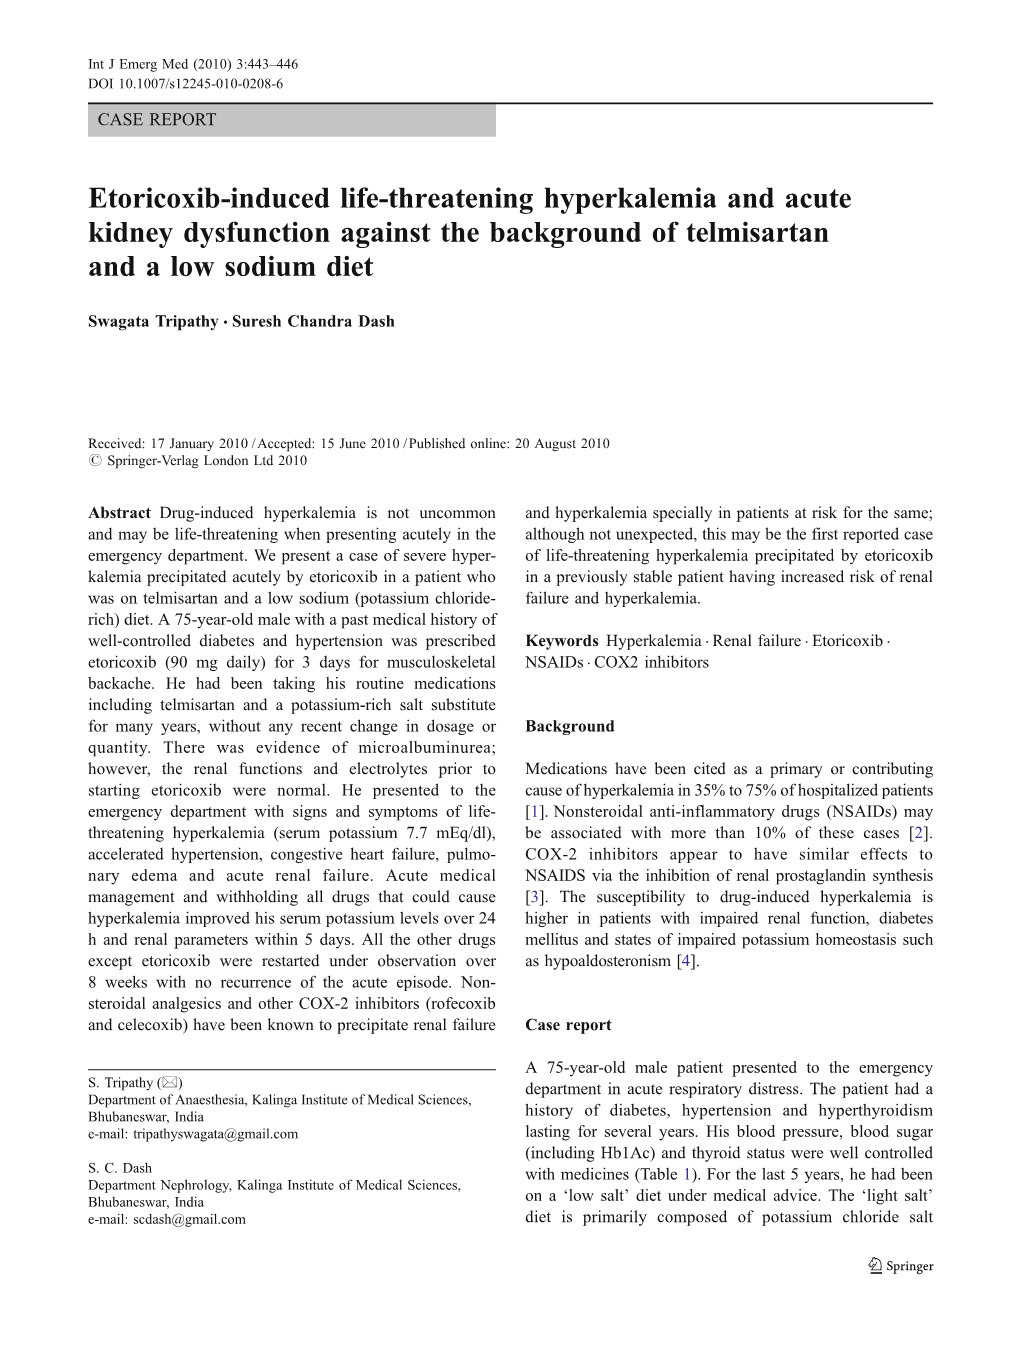 Etoricoxib-Induced Life-Threatening Hyperkalemia and Acute Kidney Dysfunction Against the Background of Telmisartan and a Low Sodium Diet